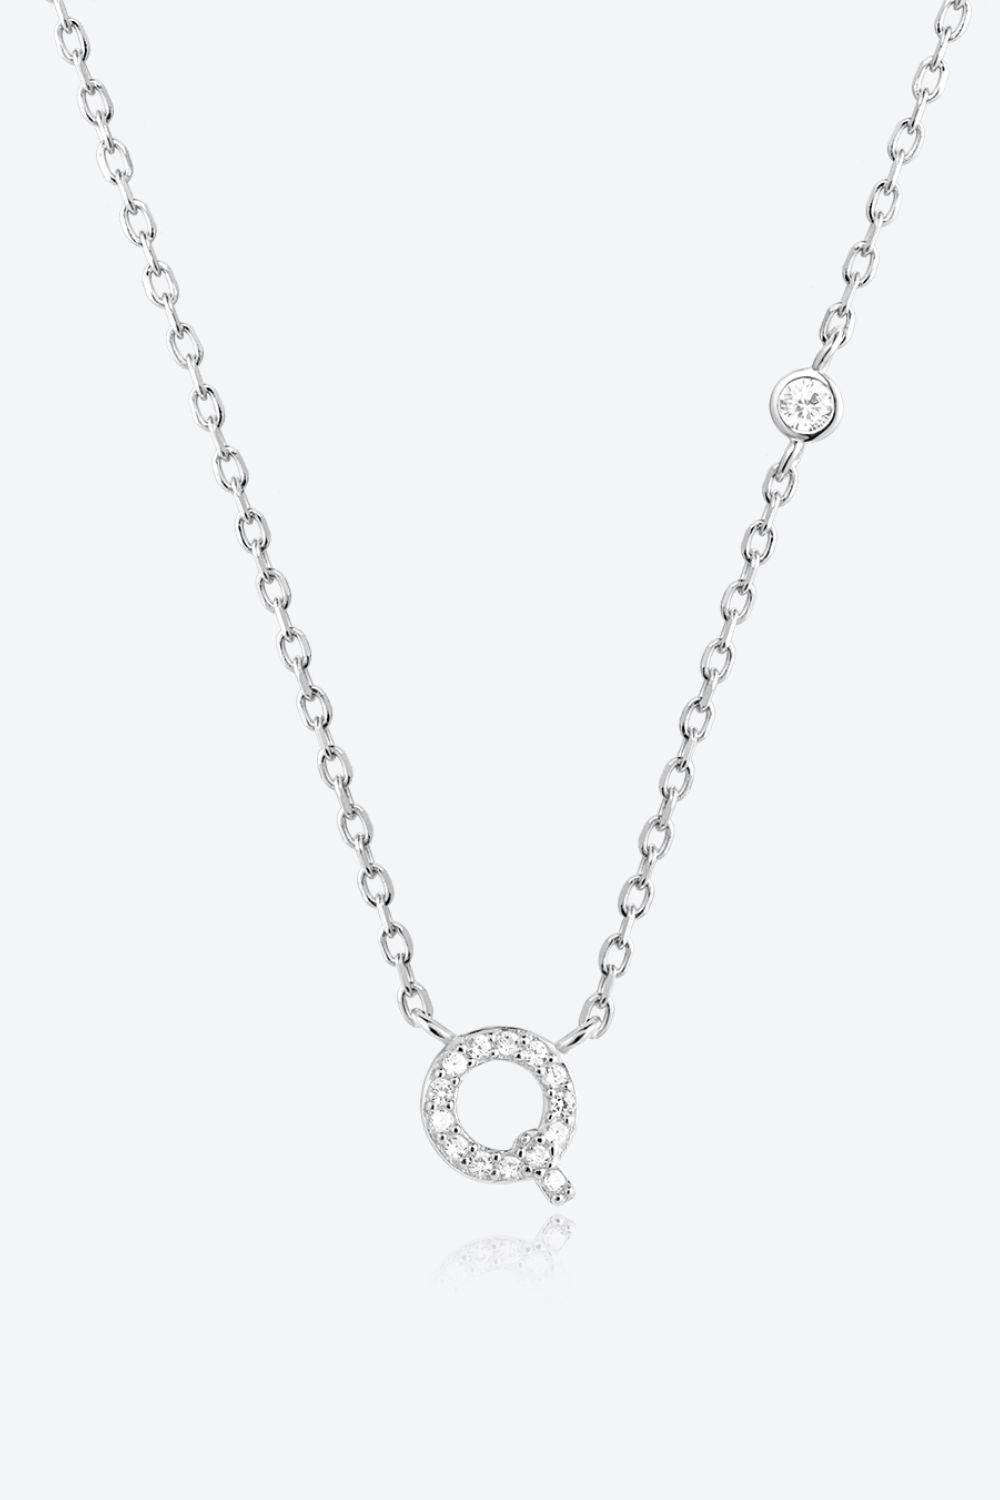 Q To U Zircon 925 Sterling Silver Necklace - Necklace